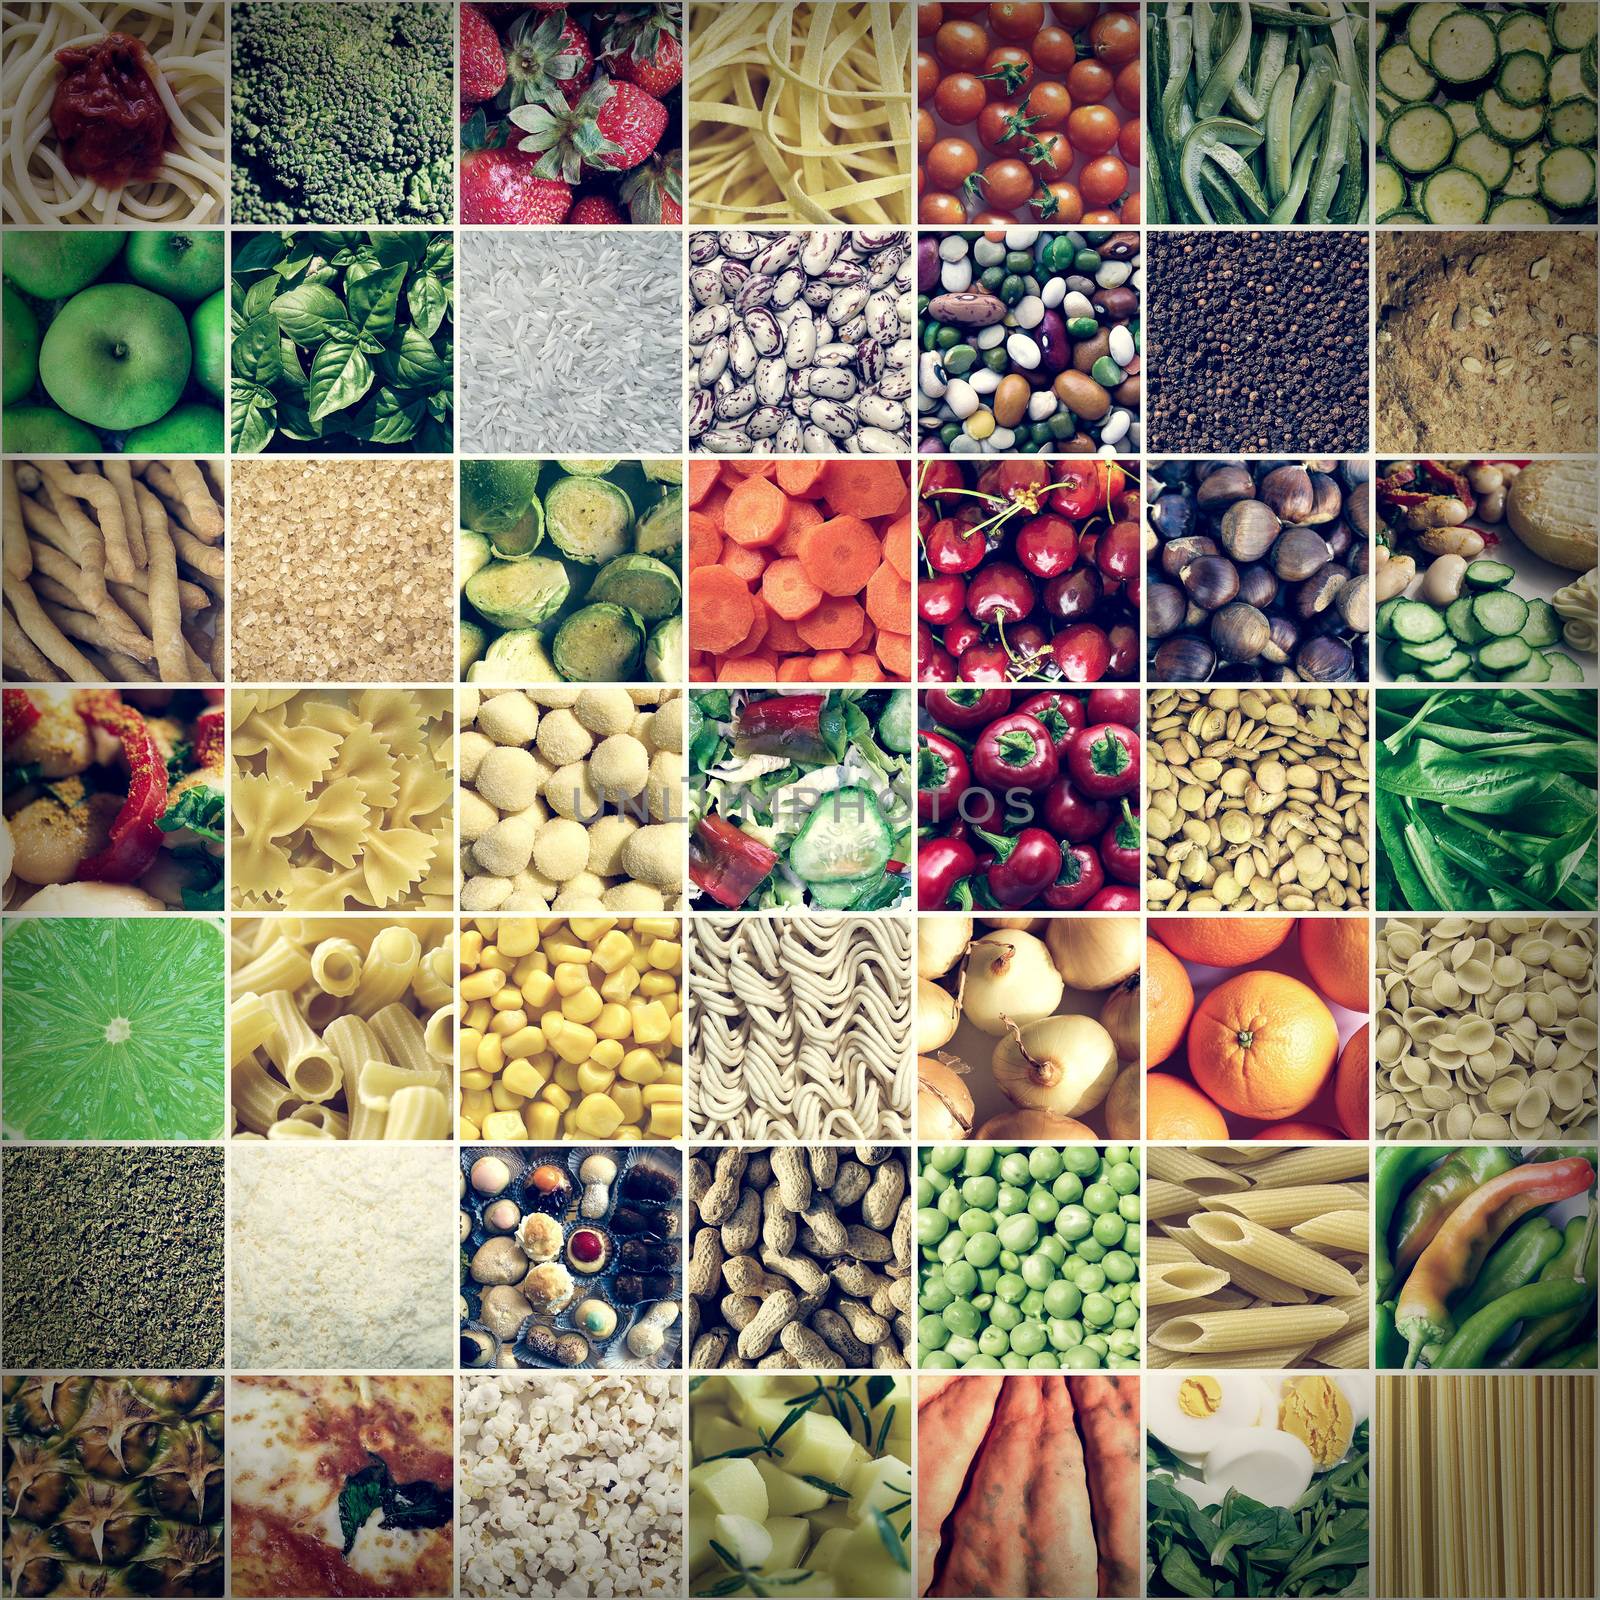 Vintage looking Food collage including 49 pictures of vegetables, fruit, pasta and more